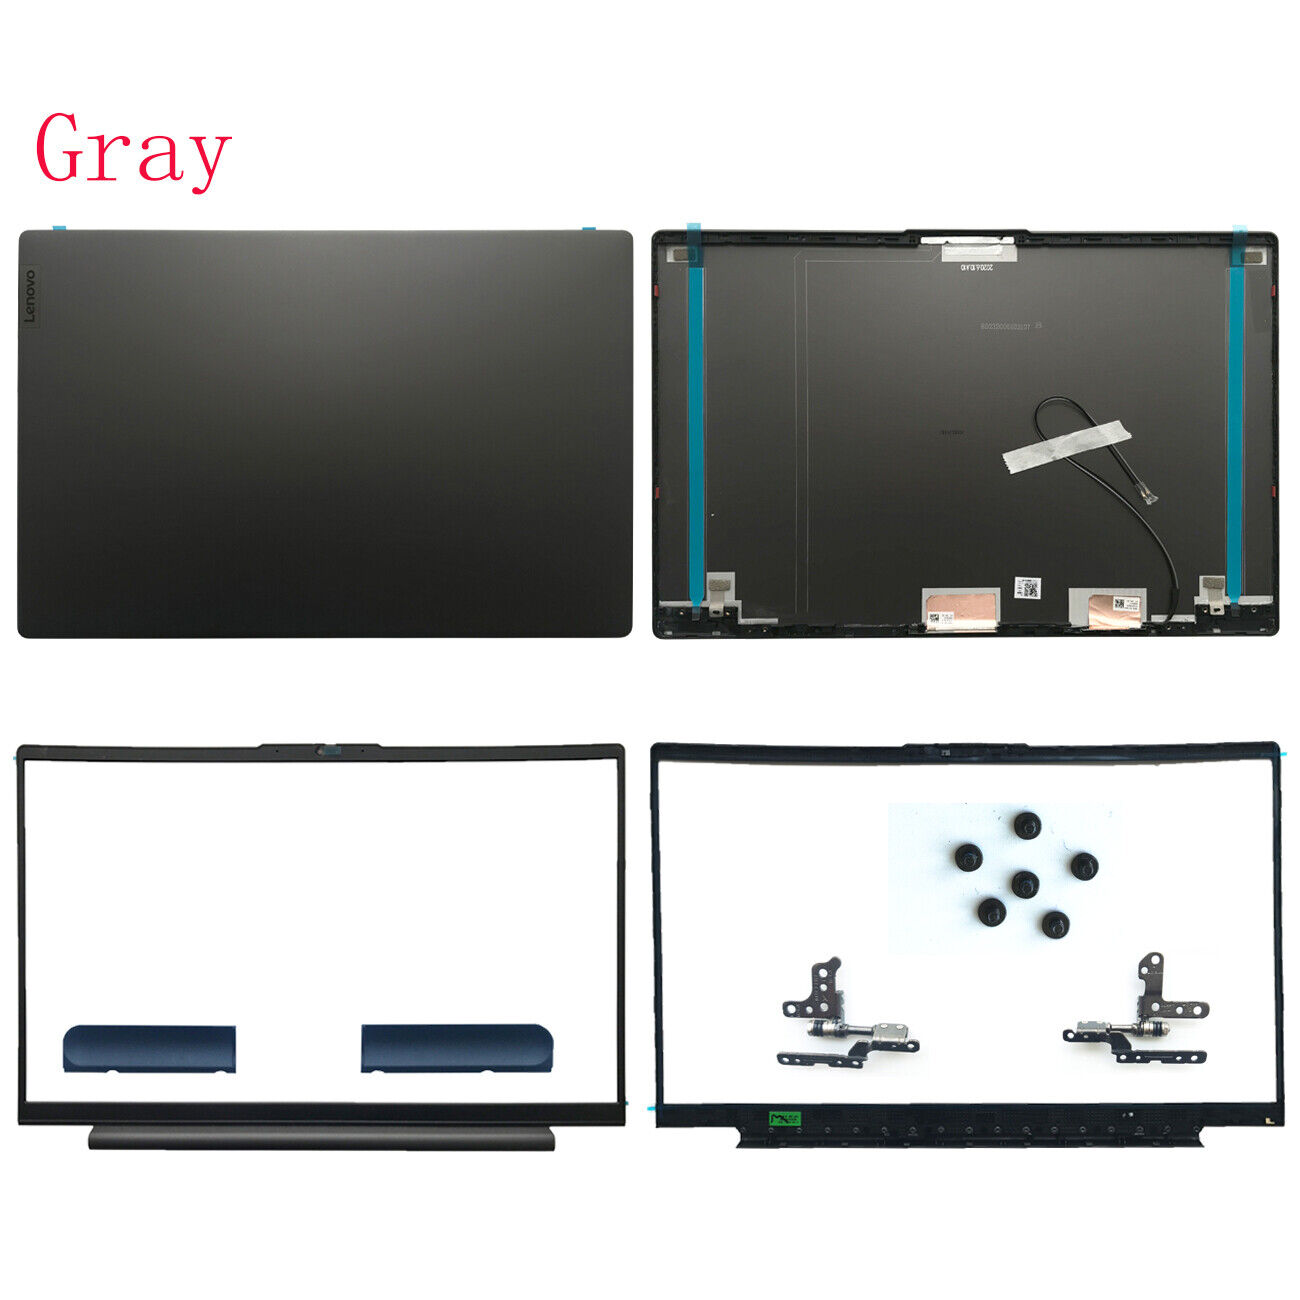 New LCD Back Cover Bezel Hinges For Lenovo IdeaPad 5 15ITL05 15IIL05 15ARE05 US